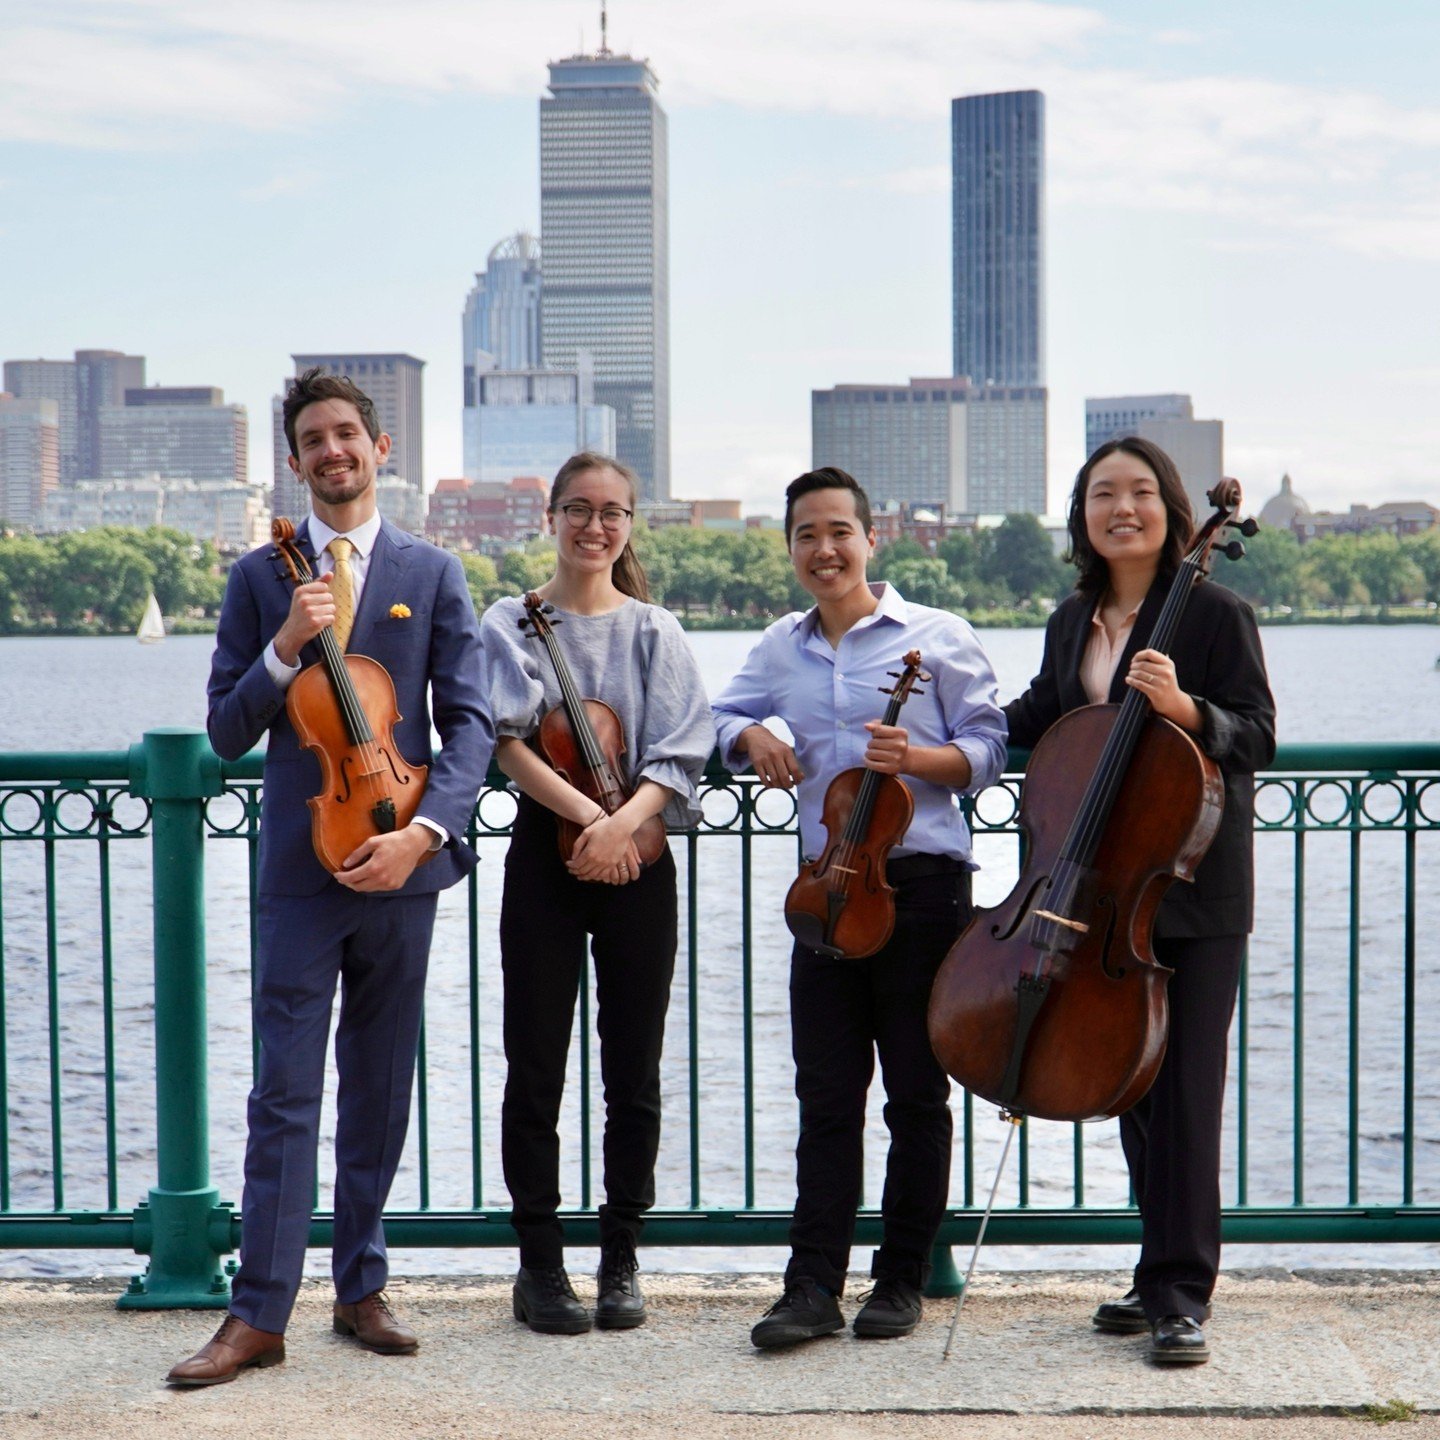 Don't miss our final Midday Music Concert of the season on Wednesday, May 8 at 1PM in Union Hall. Featuring the incredible, Boston-based @rasastringquartet back by popular demand!

Tickets at baychamber.org.